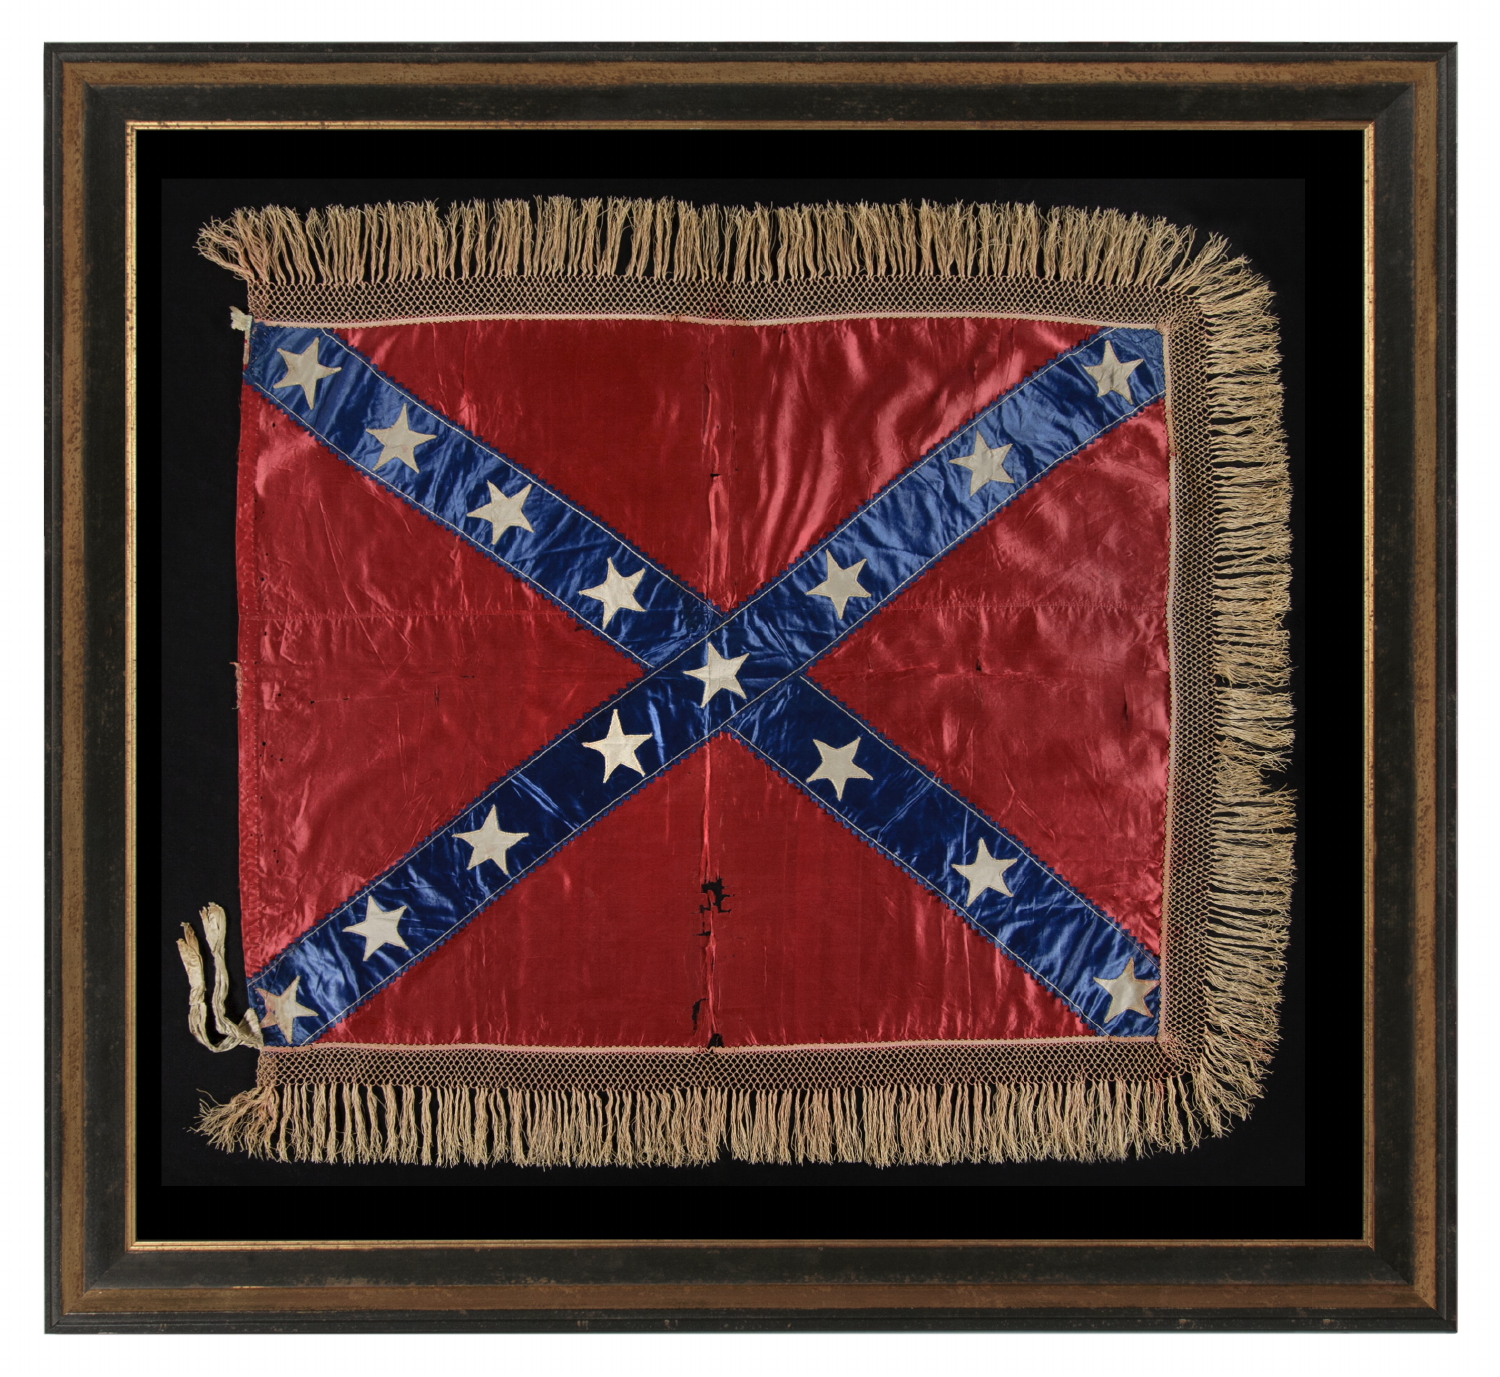 THE 15-STAR CONFEDERATE BATTLE FLAG OF GENERAL LLOYD TILGHMAN, WHO LED THE 3RD KENTUCKY INFANTRY, COMPANY D, CAPTURED AND IMPRISONED AT FORT WARREN IN BOSTON HARBOR, RELEASED IN EXCHANGE FOR UNION GENERAL JOHN REYNOLDS; DEFEATED GRANT AT COFFEYVILLE, KANSAS; KILLED IN ACTION IN VICKSBURG CAMPAIGN AT THE BATTLE OF CHAMPION HILL WHEN STRUCK IN THE CHEST BY A CANNONBALL; THE MOST BEAUTIFUL EXAMPLE I HAVE EVER SEEN ACROSS ALL SOUTHERN CROSS FORMAT BATTLE FLAGS & ONE OF JUST FOUR KNOWN IN THIS RARE S